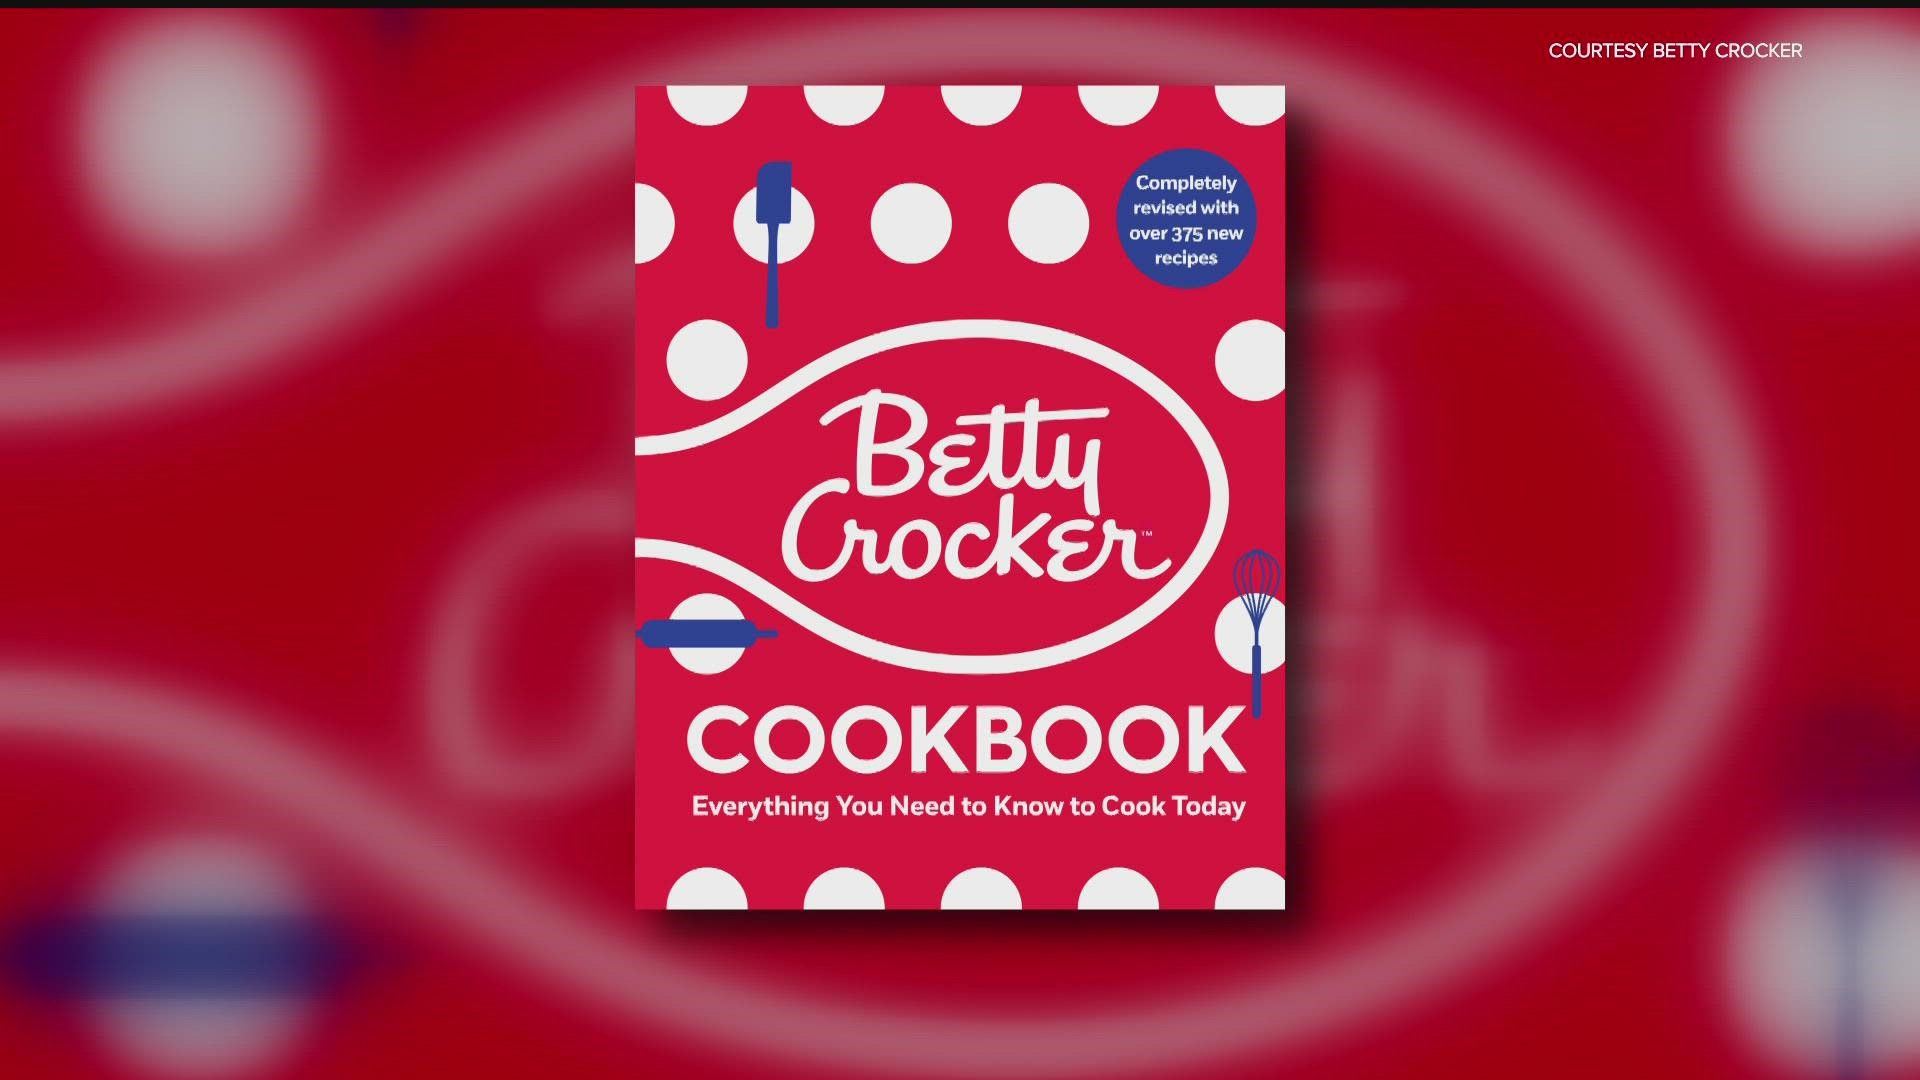 Check out a twist on a classic recipe in the new 13th edition of the Betty Crocker Cookbook.